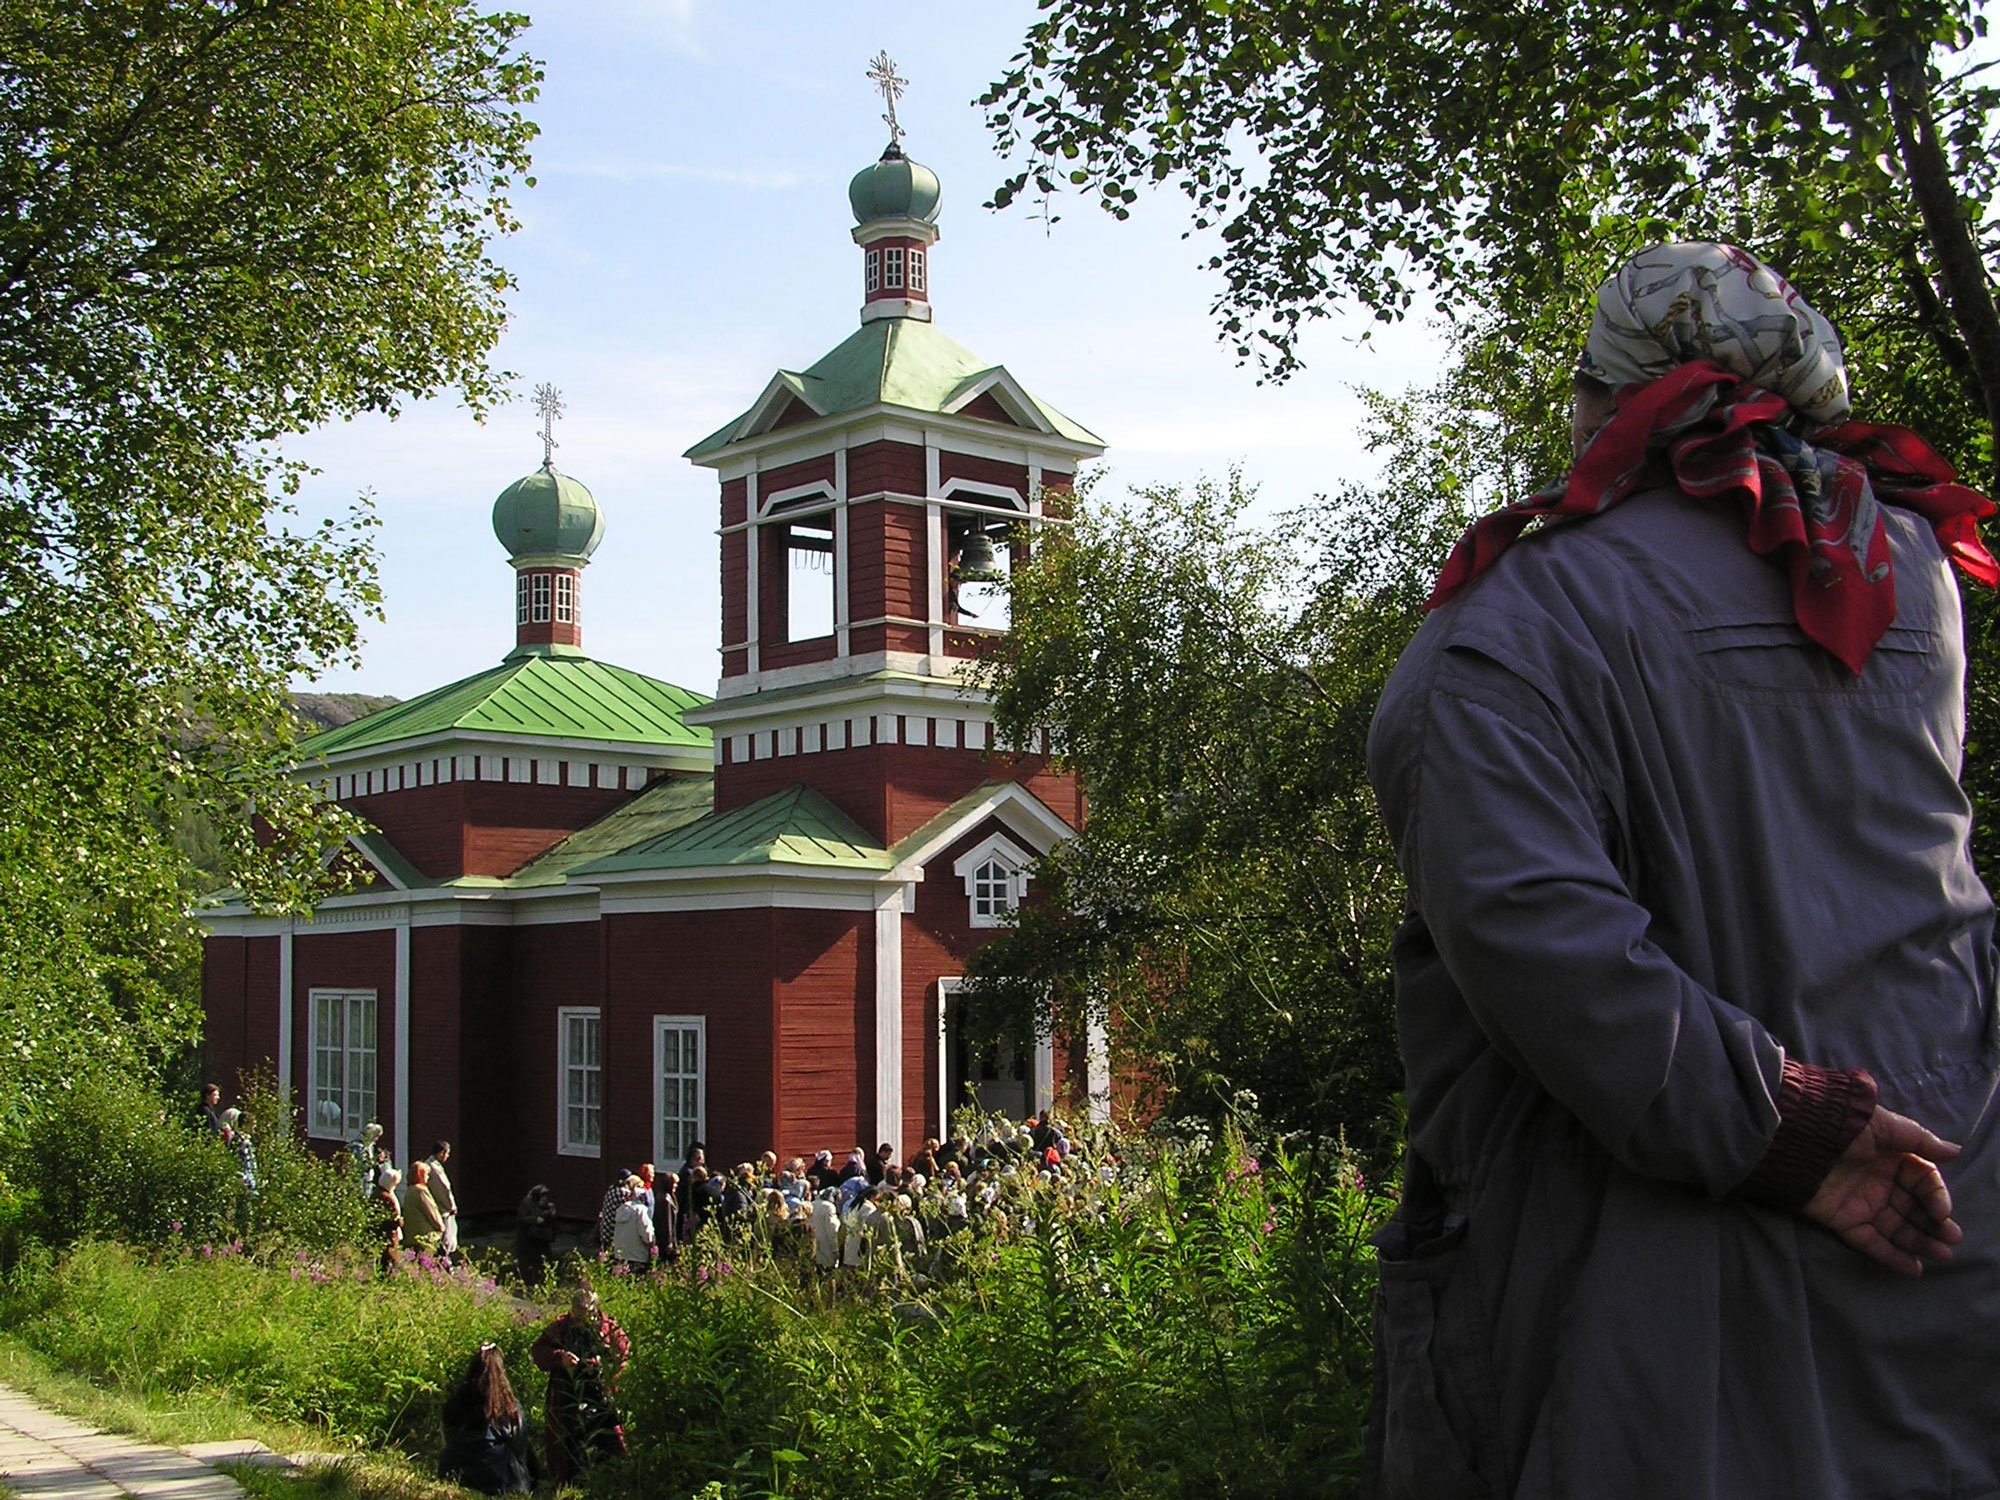 “Here starts a hostile and unfriendly world.” Top Murmansk clergyman Mitrofan visits Boris and Gleb Church on border to Norway